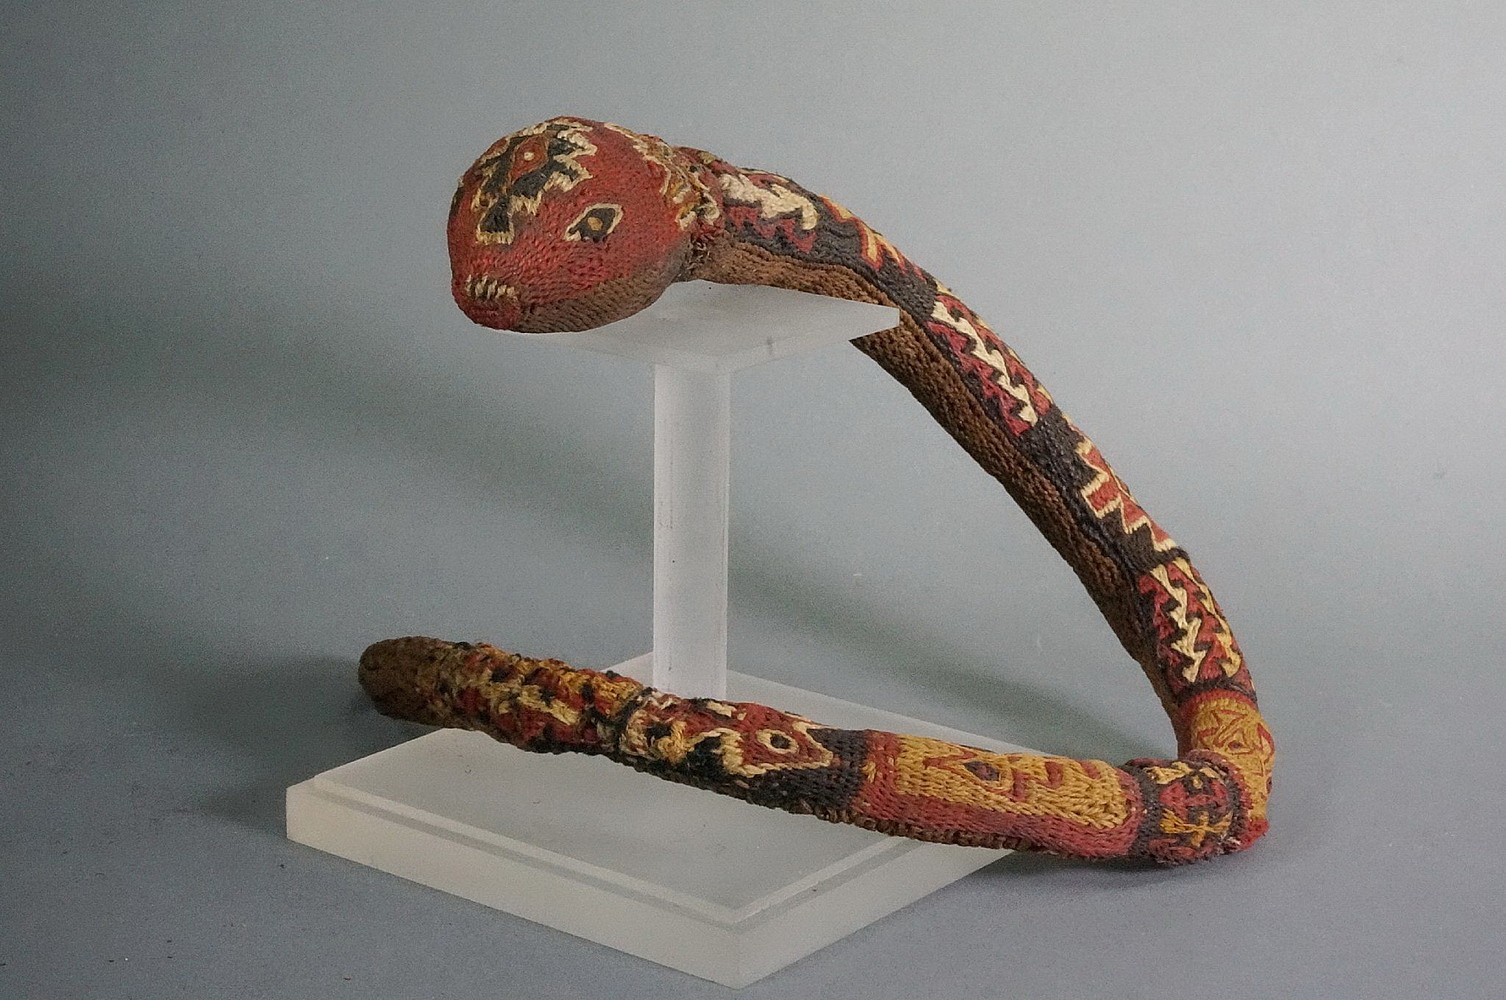 Peru, Wari three dimensional coil woven snake dance wand
Shamans use dance wands hypnotize their attendants.   This wand has 6 different patterns on its back and a solid brown underside.  The tip has a 3" section of woven hemp which appears to be poisonous. There are many poisonous snakes in Peru including the dangerous Bushmaster.   Formerly in the collection of Justin and Barbara Kerr, acquired from Alan Lapiner in 1967.
Media: Textile
Dimensions: Length: 19 1/2" x Diameter: 1 1/2" tapering to 3/8"
$4,000
n7016